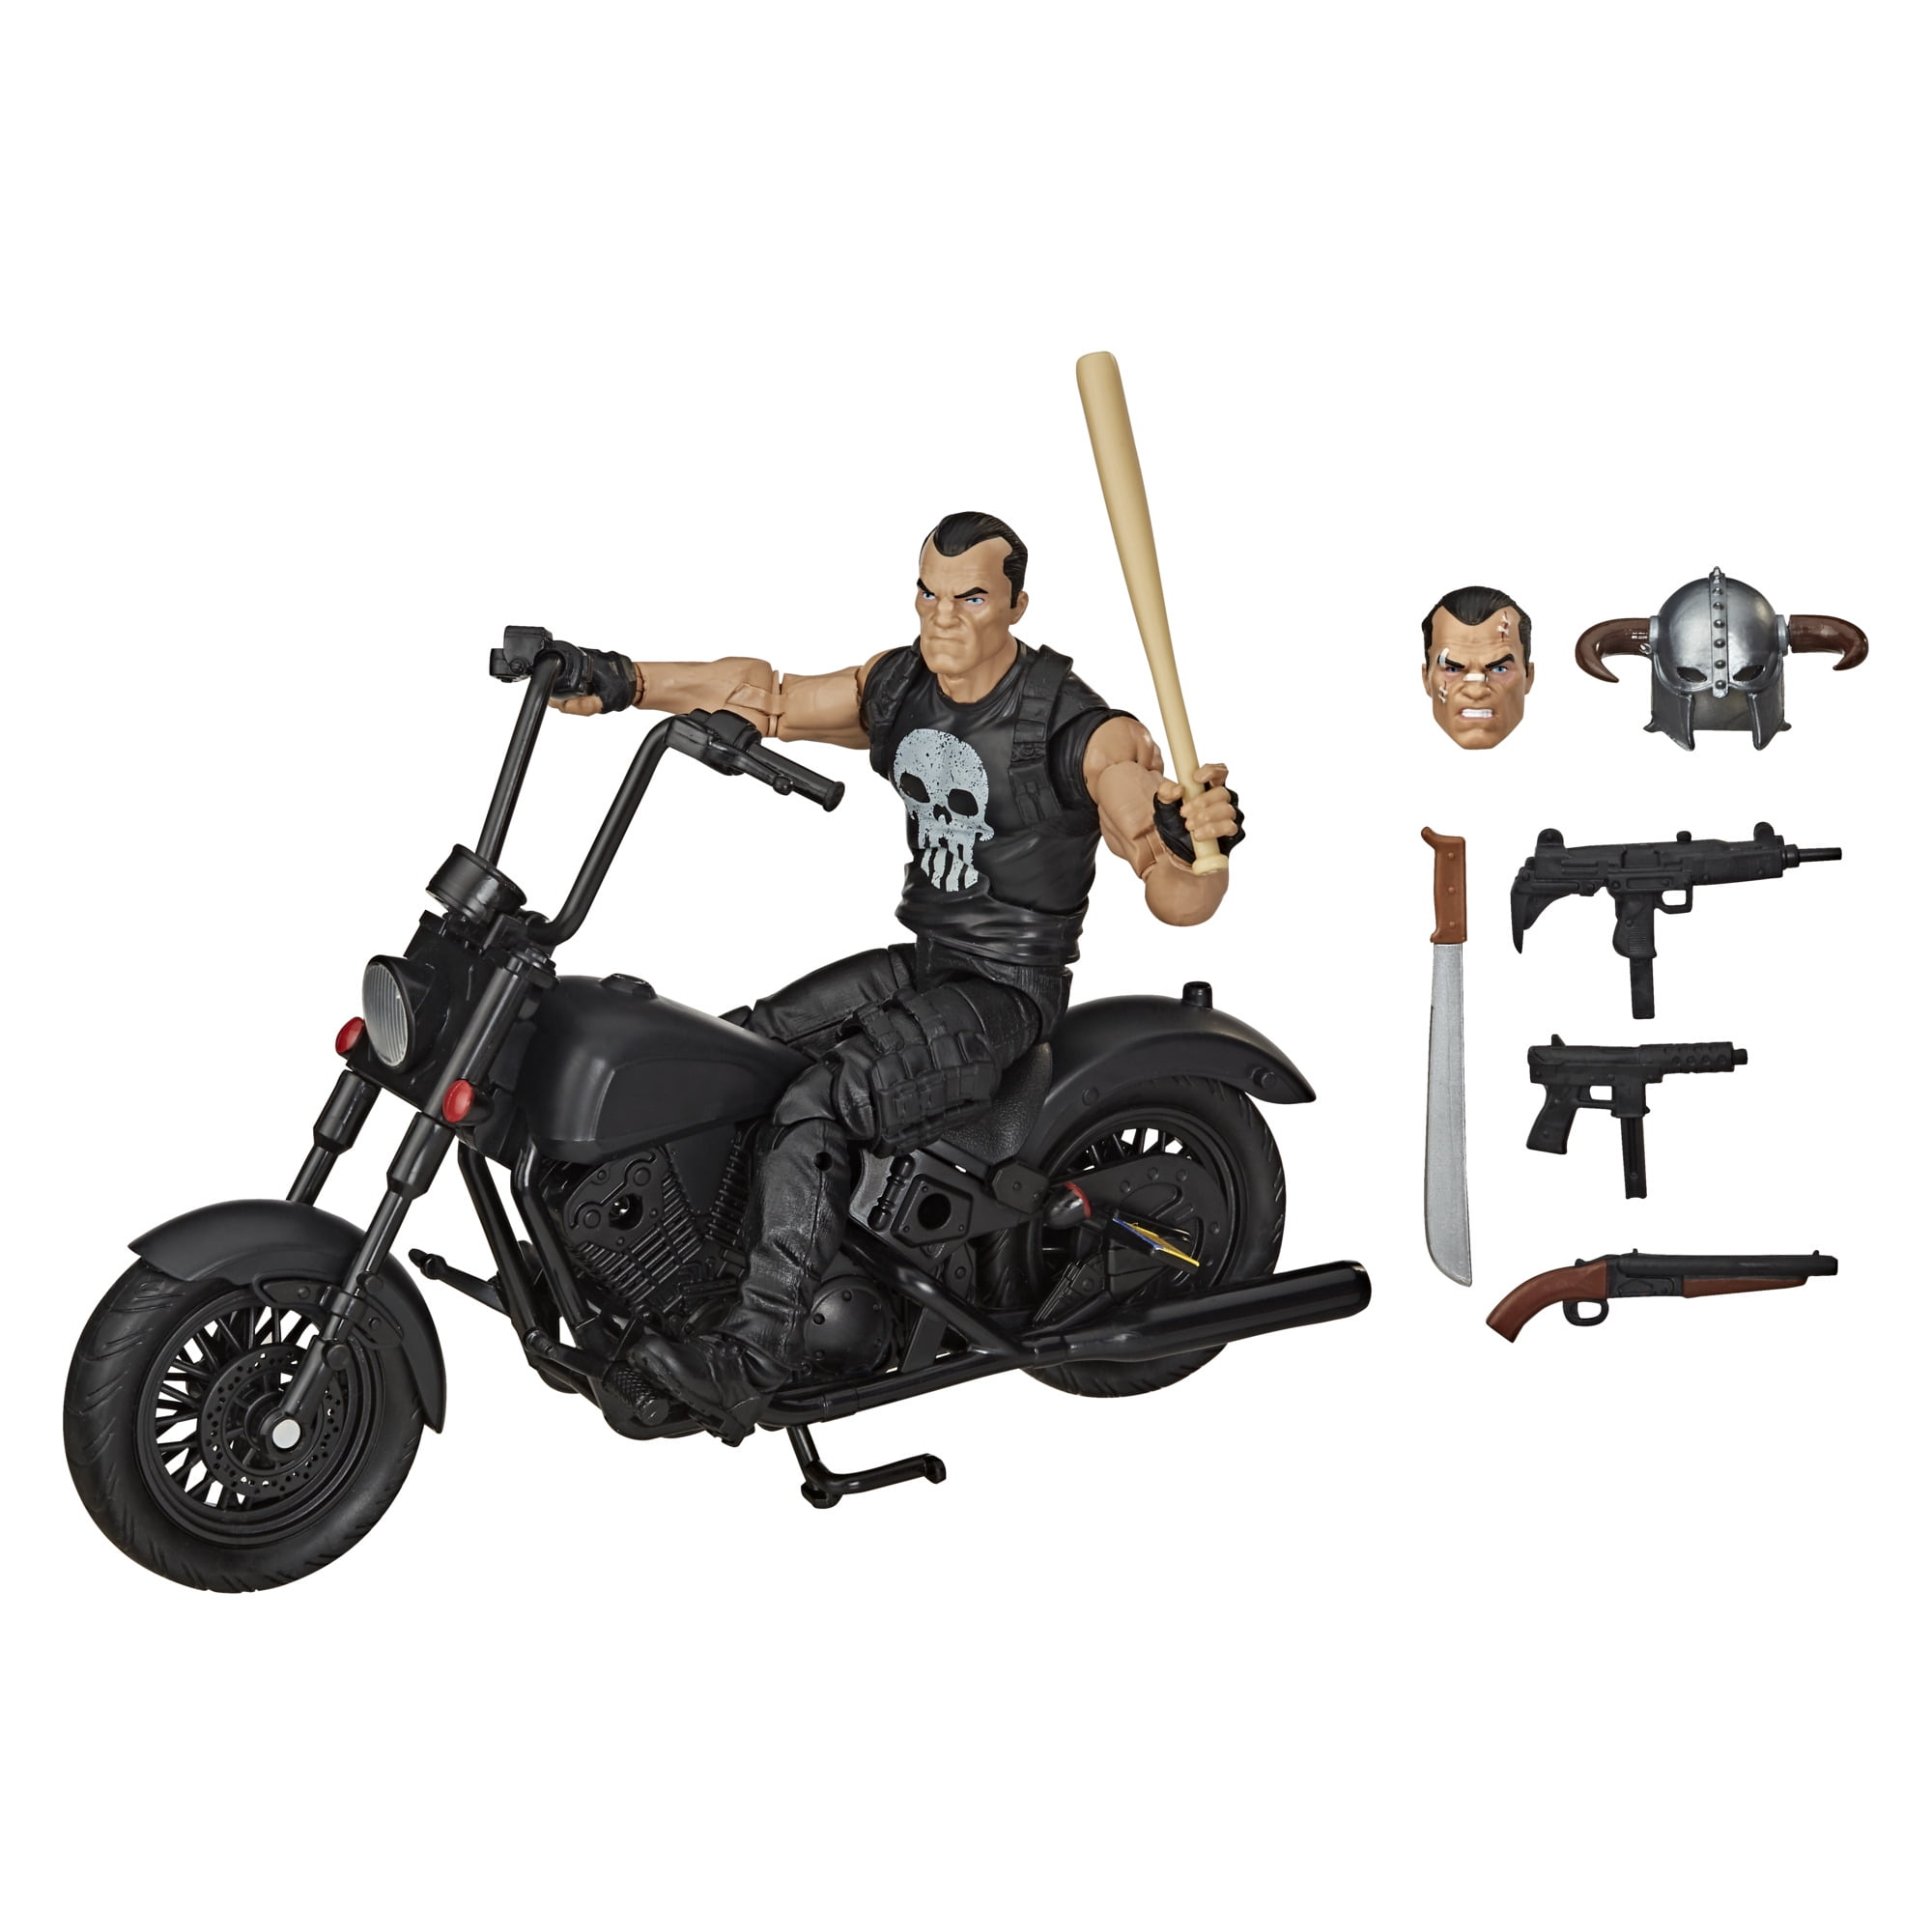 show original title Details about   New marvel legends the punisher series vintage retro wave figure by hasbro 2017